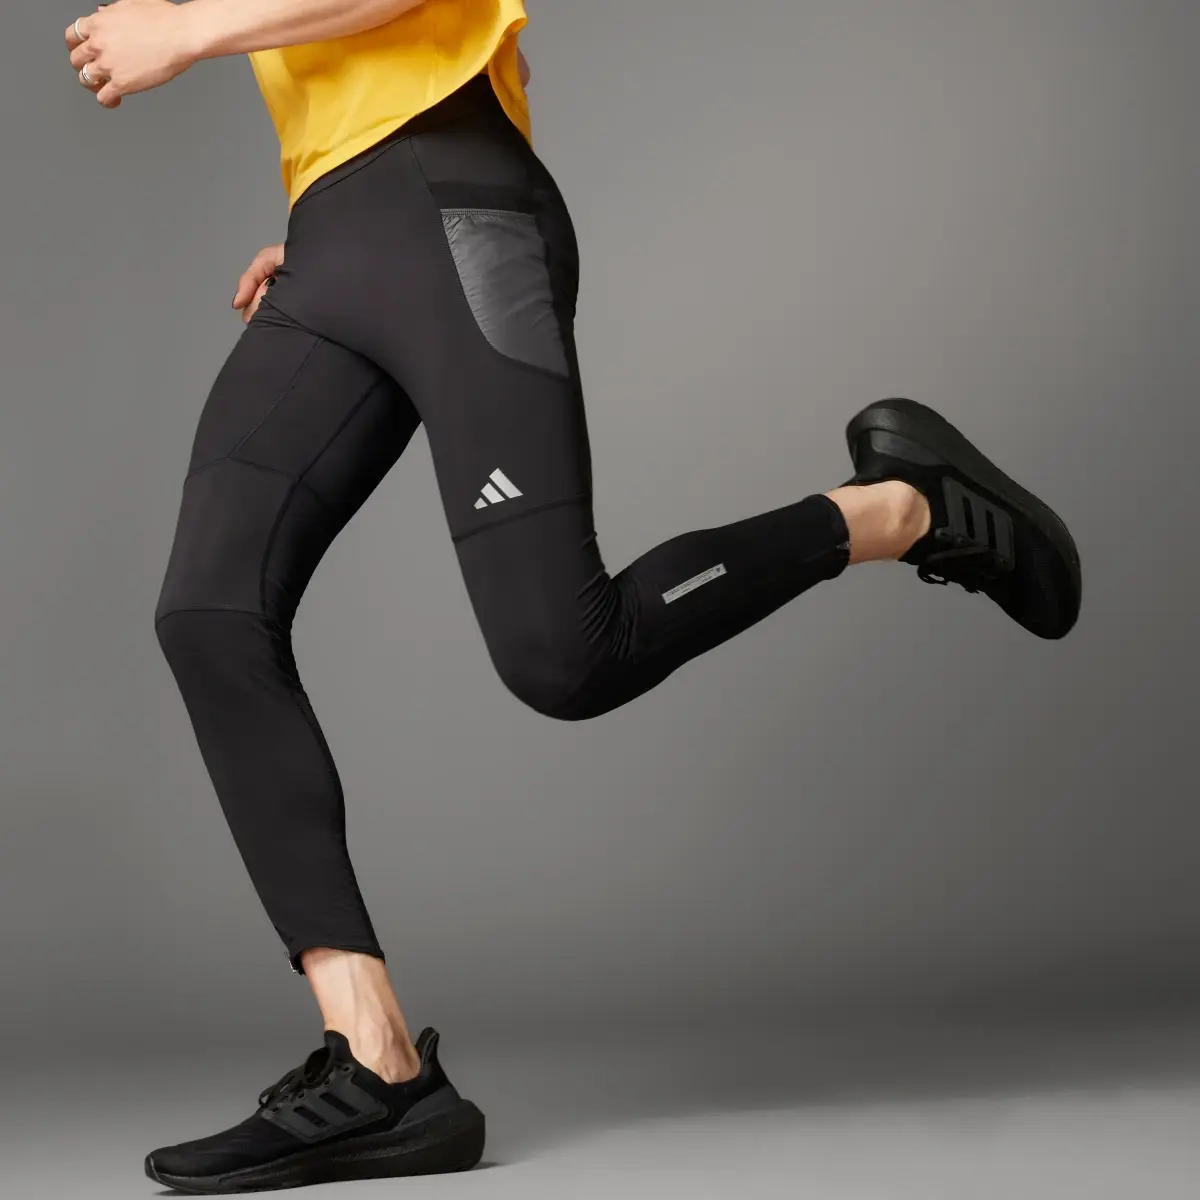 Adidas Ultimate Running Conquer the Elements COLD.RDY Leggings. 1